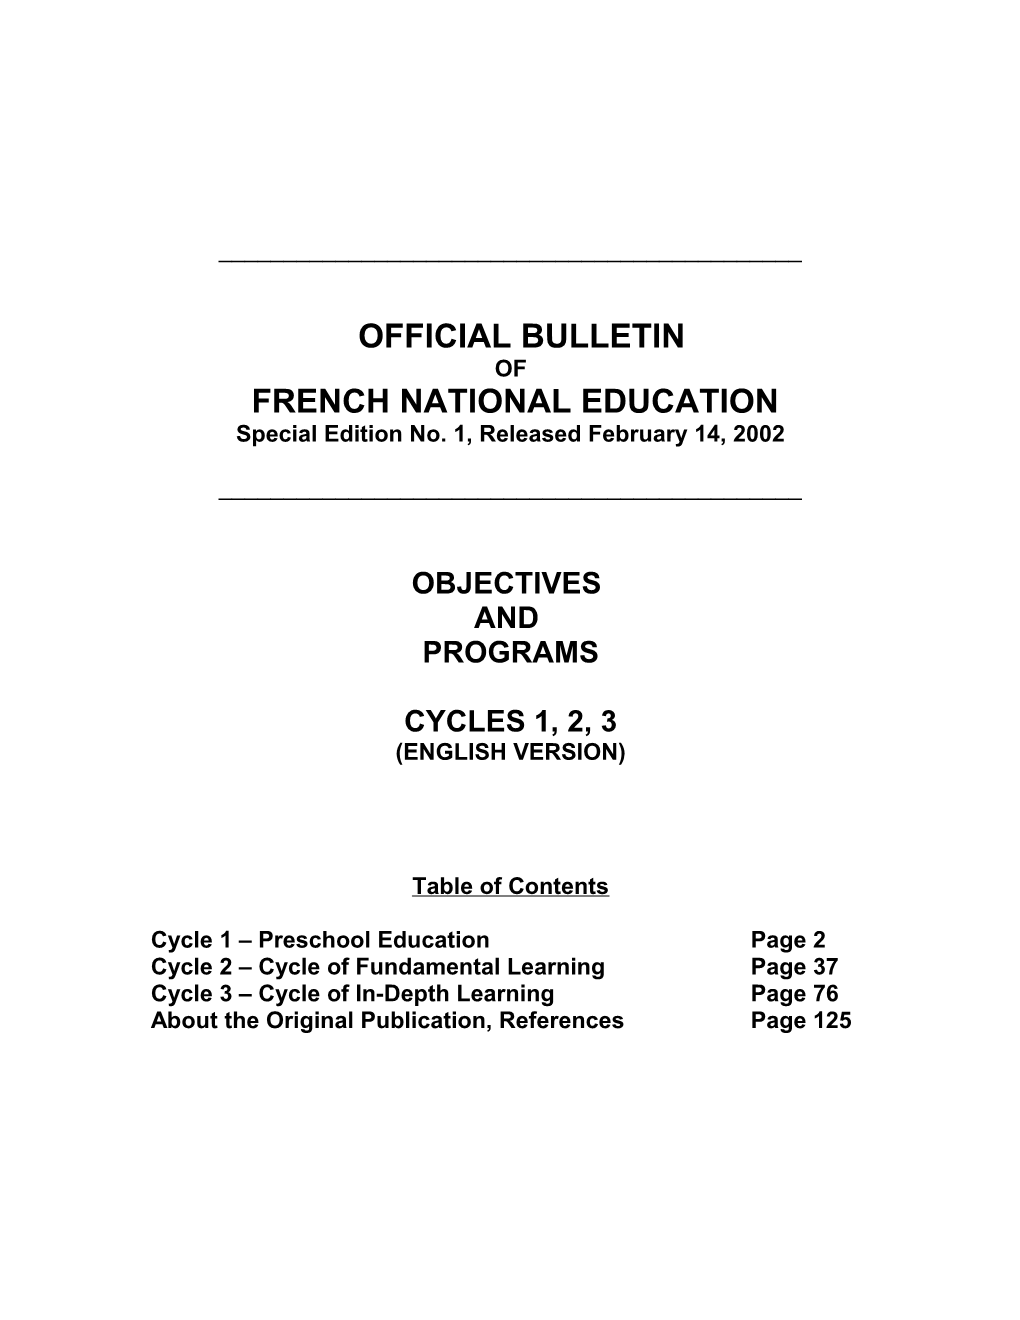 Official Bulletin of National Education